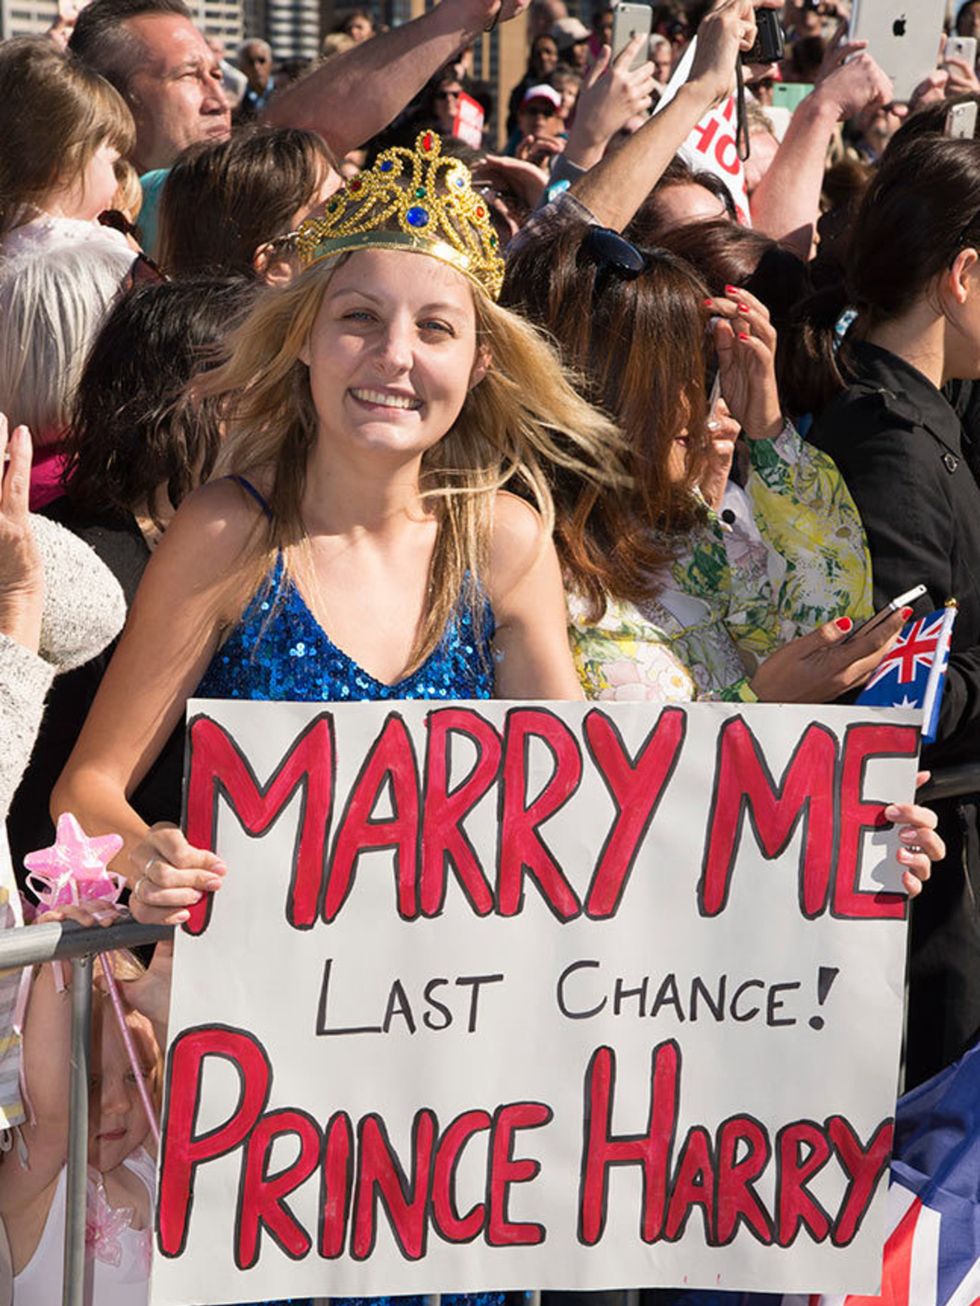 <p>After a couple of quiet years on the Harry girlfriend front (and a US reality TV show, I Wanna Marry Harry, in the can), über-fan Victoria McRae took a punt with this proposal-by-banner. Harry - very politely - declined.</p>

<p>Royal fan Victoria McRa